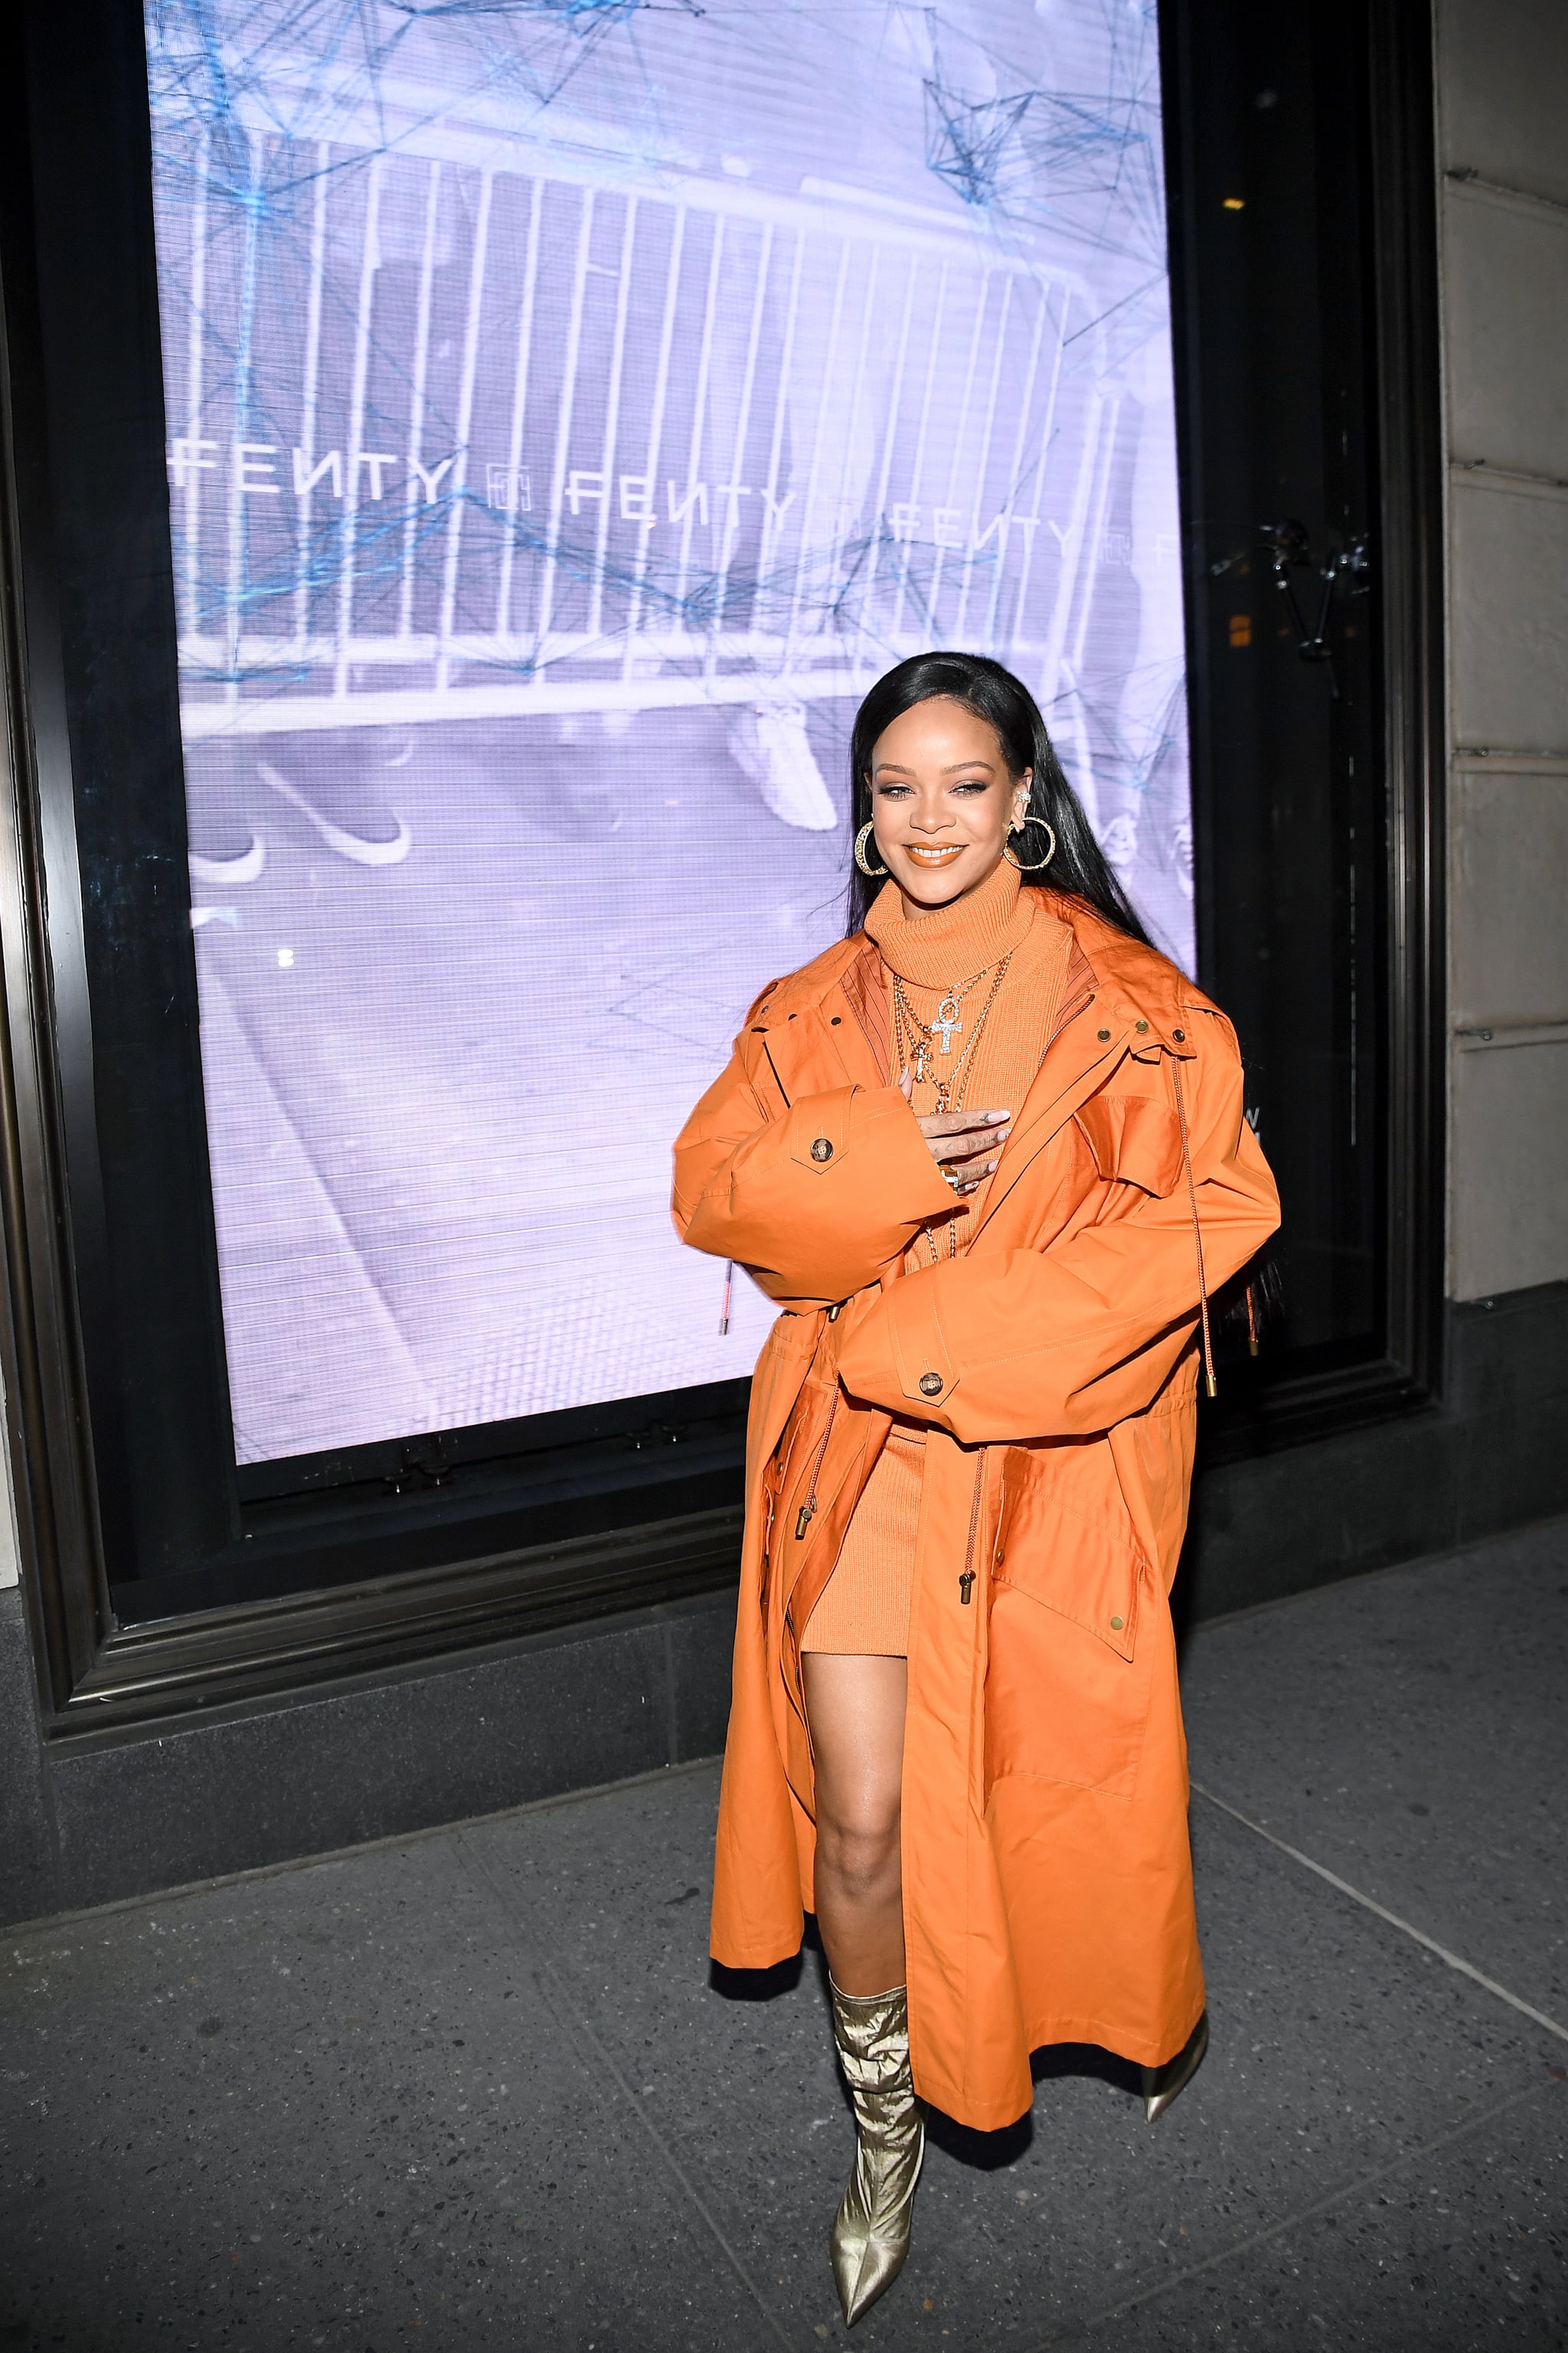 NEW YORK, NEW YORK - FEBRUARY 07: Robyn Rihanna Fenty and Linda Fargo celebrate the launch of FENTY at Bergdorf Goodman at Bergdorf Goodman on February 07, 2020 in New York City. (Photo by Dimitrios Kambouris/Getty Images for Bergdorf Goodman)